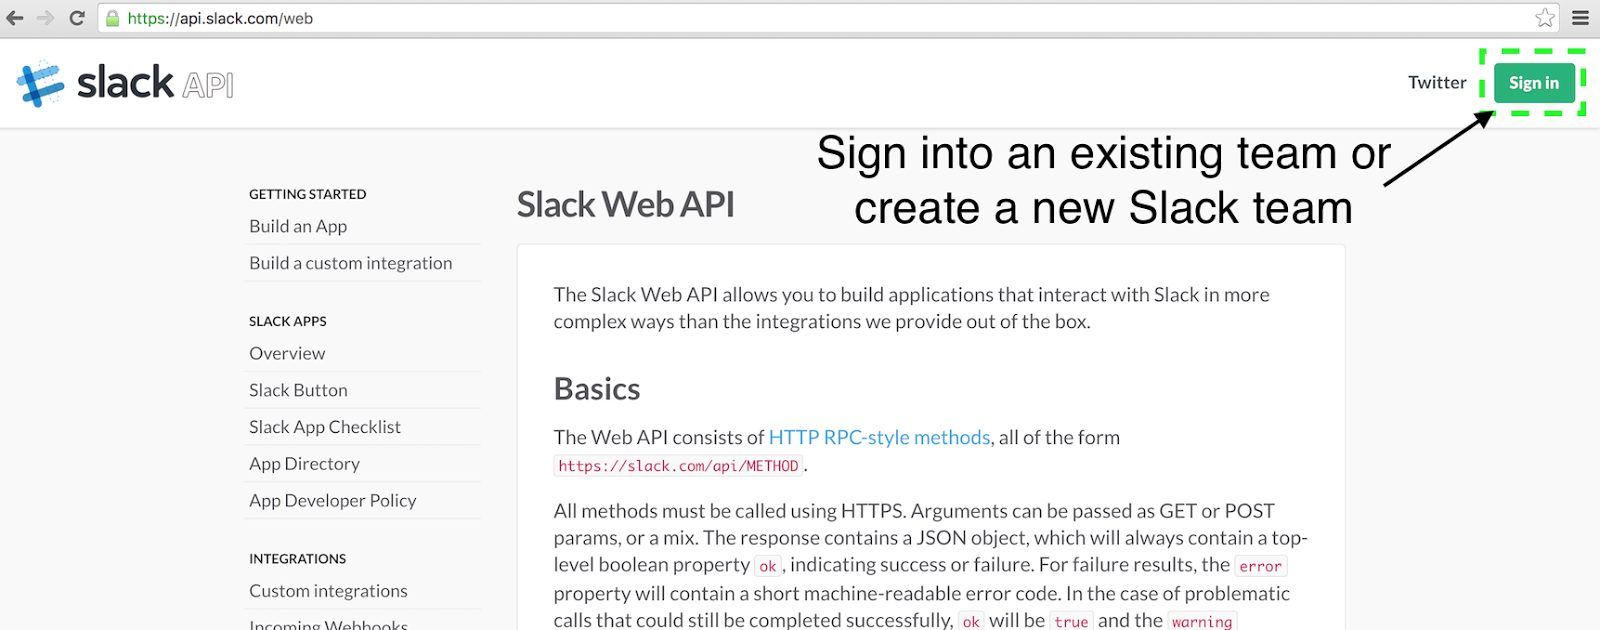 Use the sign in button on the top right corner of the Slack API page.